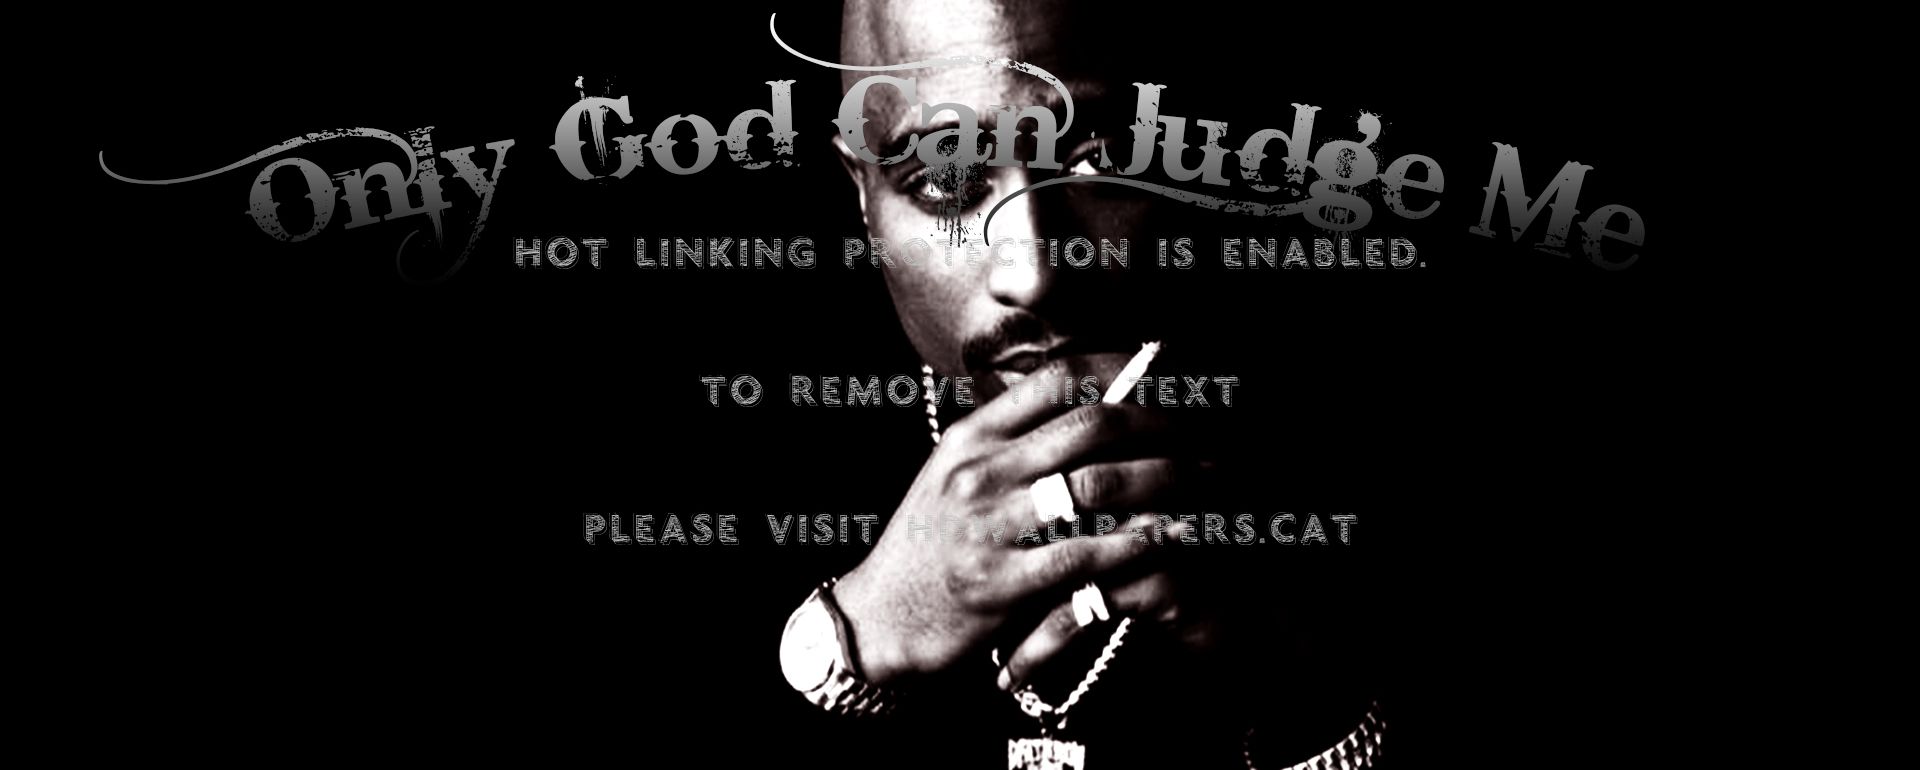 tupac (only god can judge me) timeline 2pac